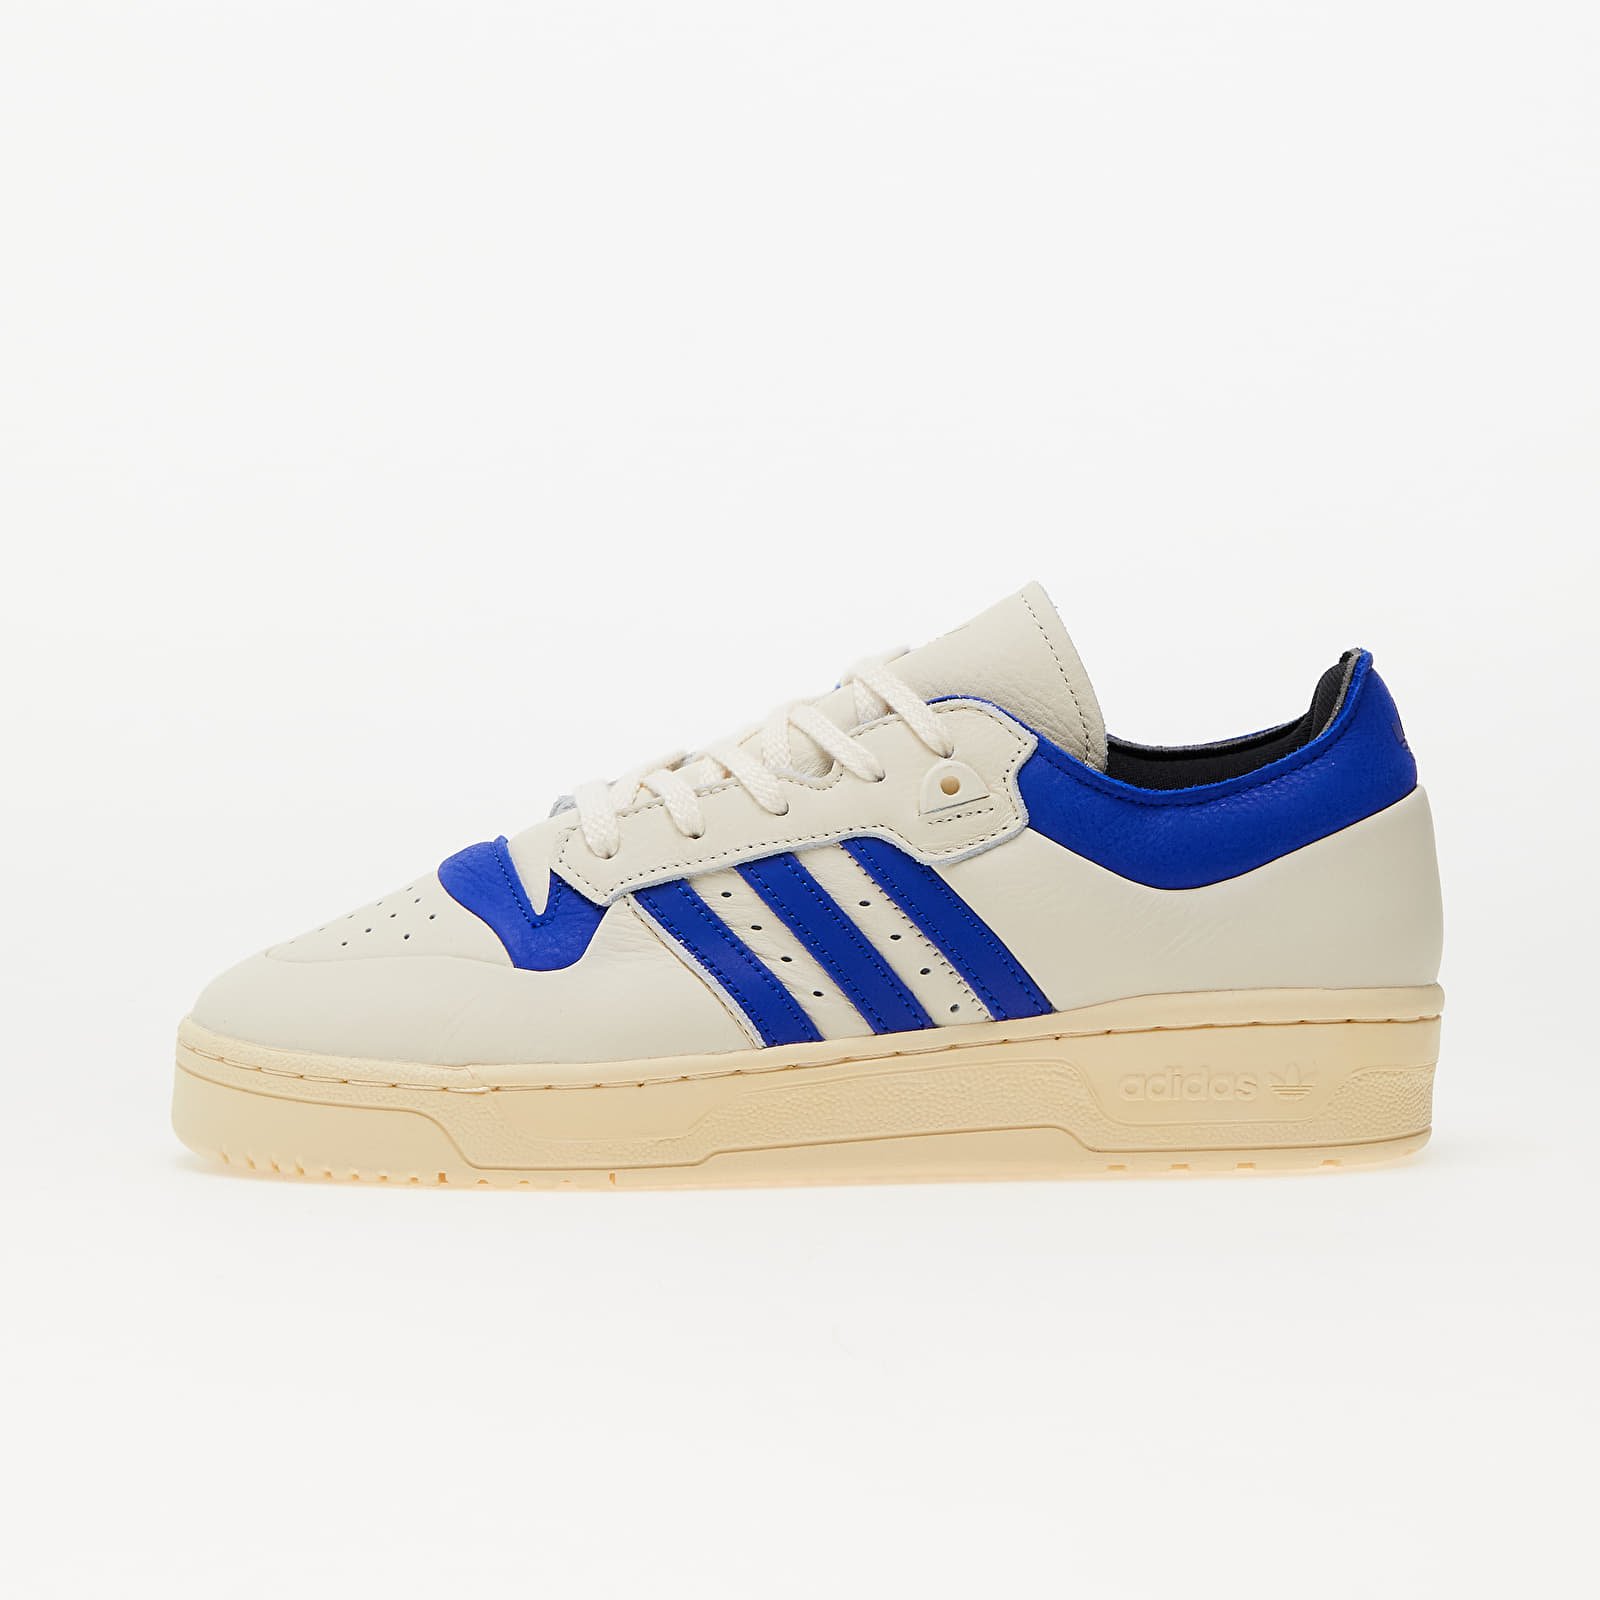 Buty męskie adidas Rivalry 86 Low 002 Crew White/ Lucid Blue/ Easy Yellow